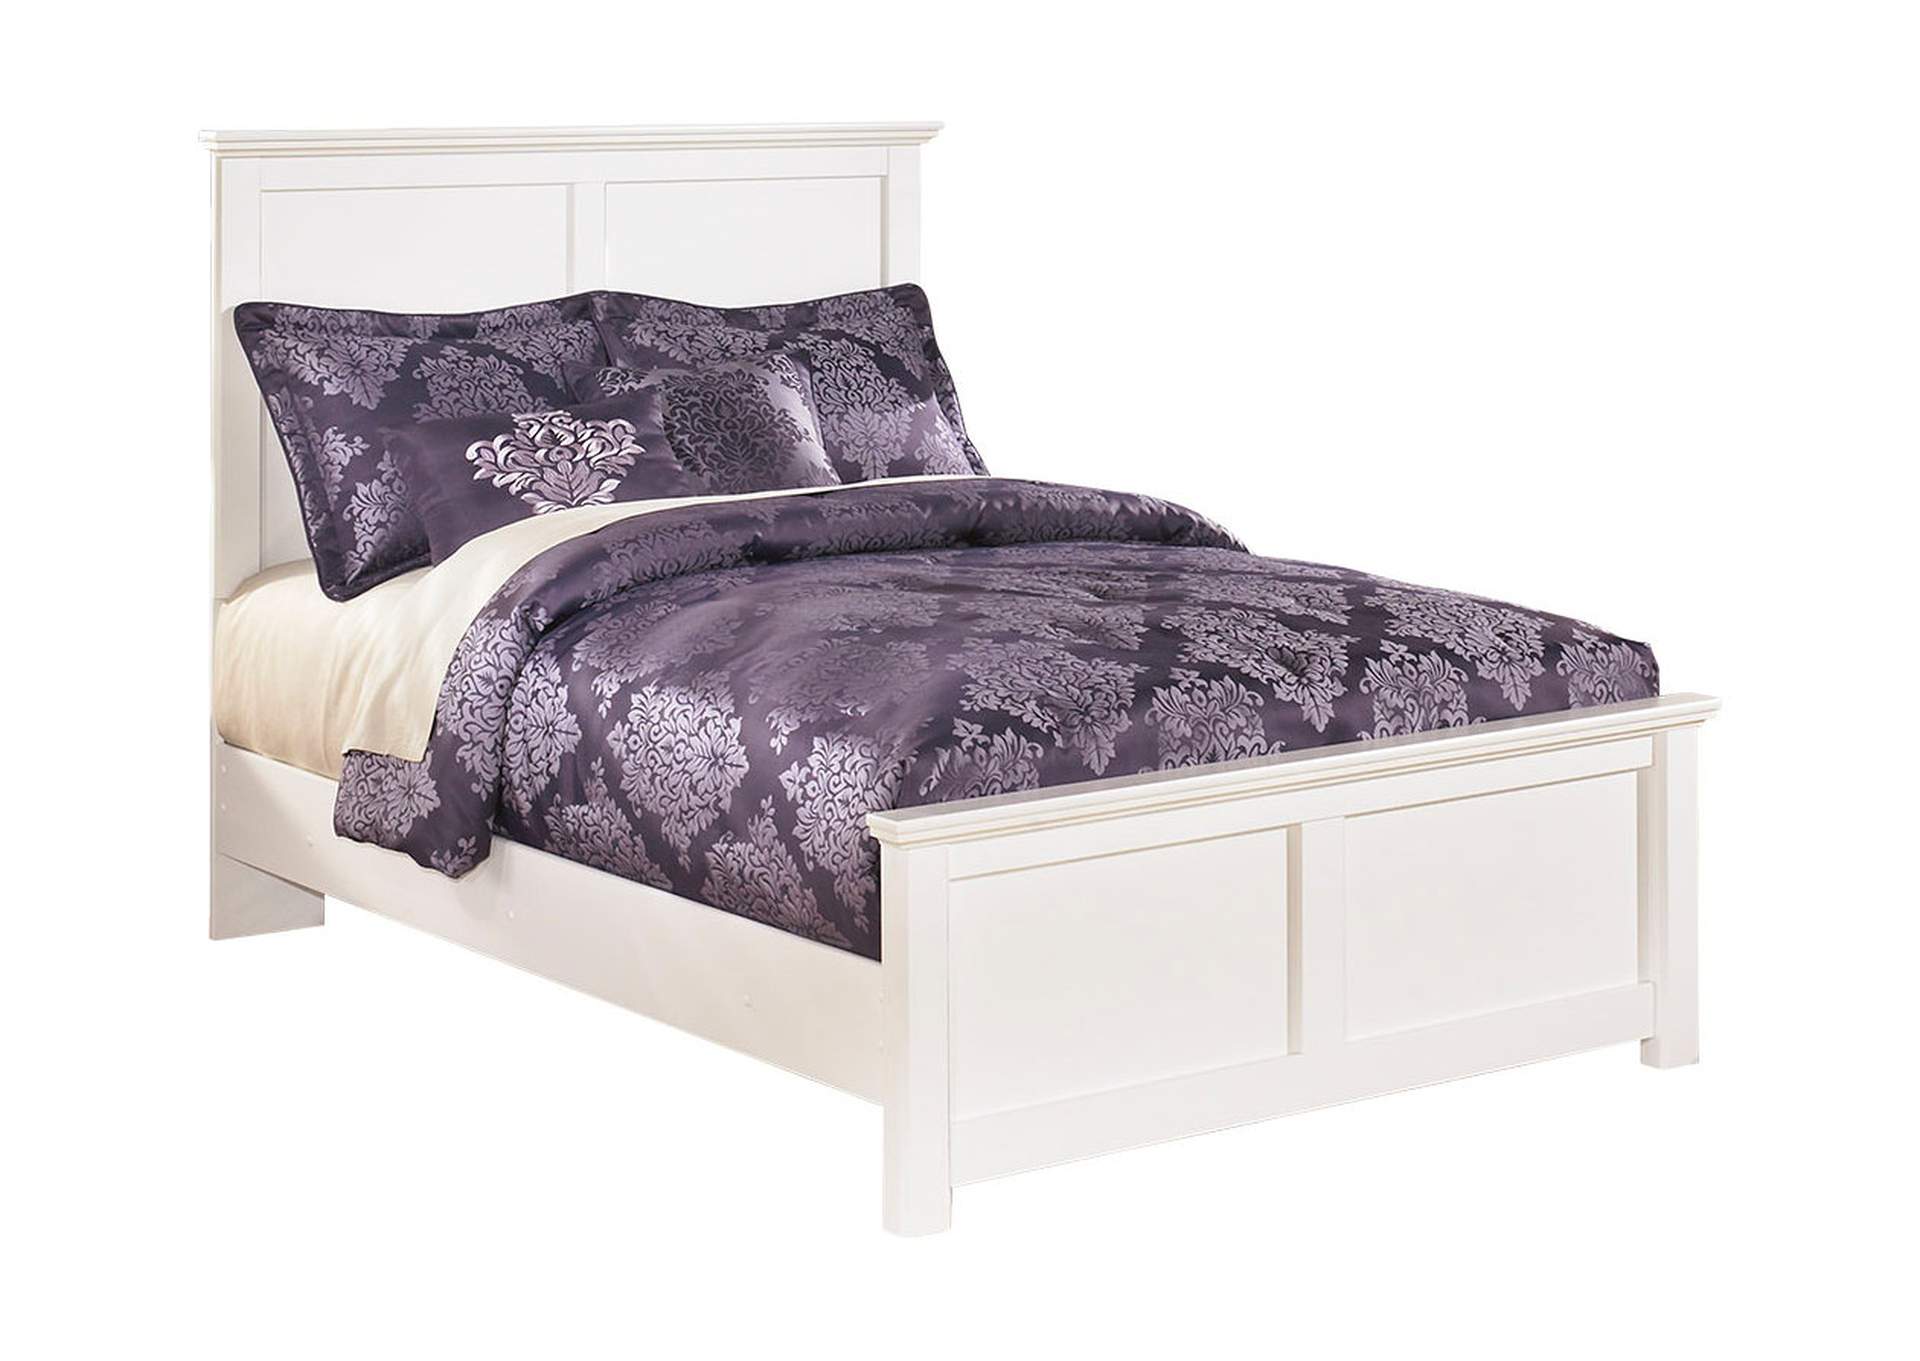 Bostwick Shoals Full Panel Bed, Dresser and Mirror,Signature Design By Ashley